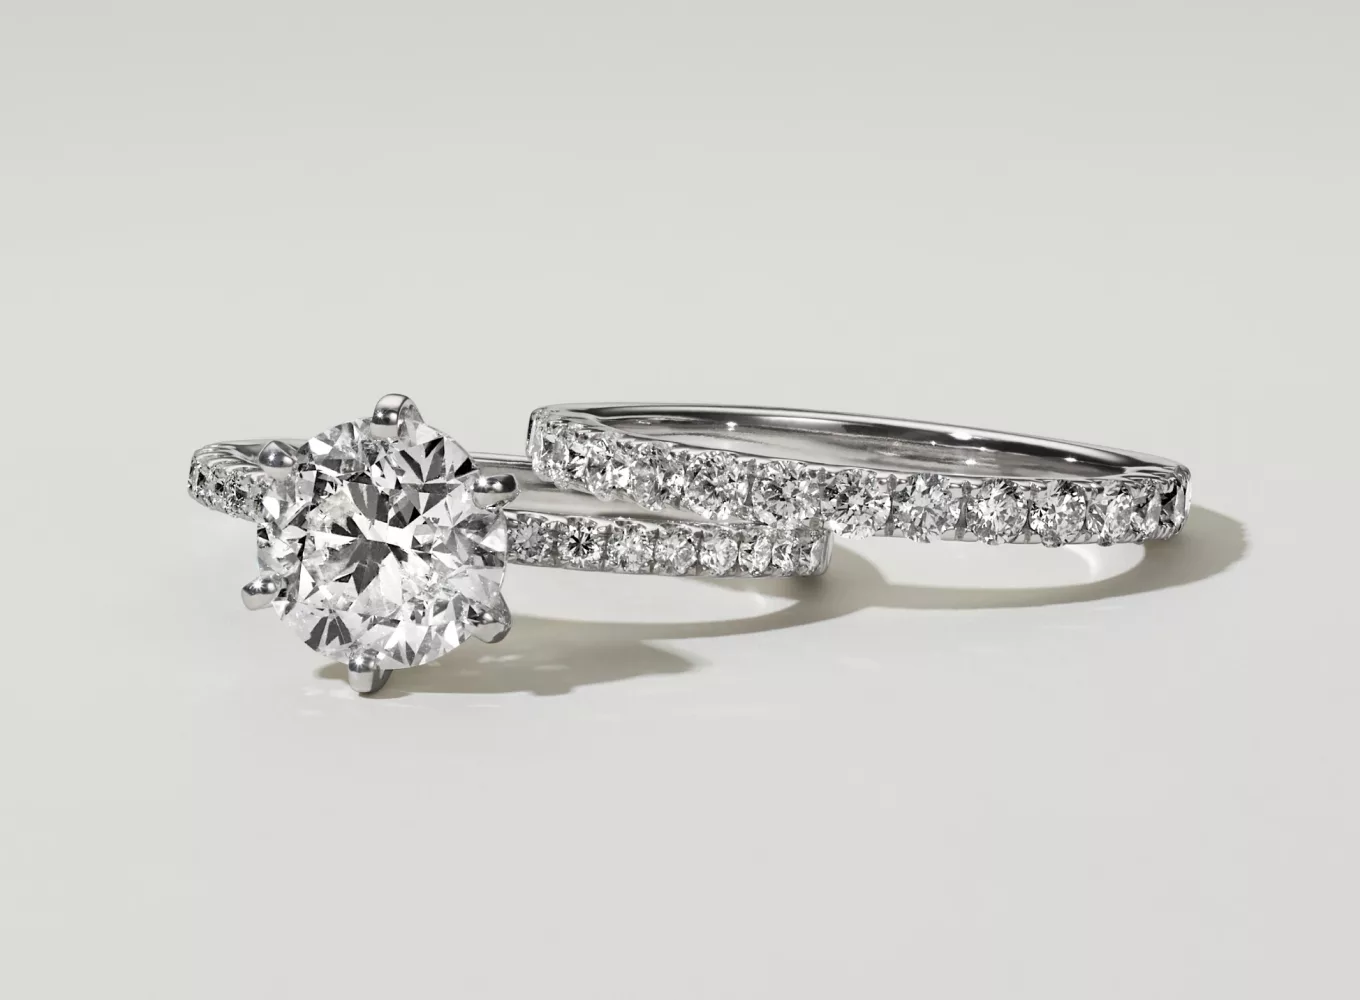 Matching wedding ring set featuring a round center stone in white gold. A pave engagement ring and pave wedding band set